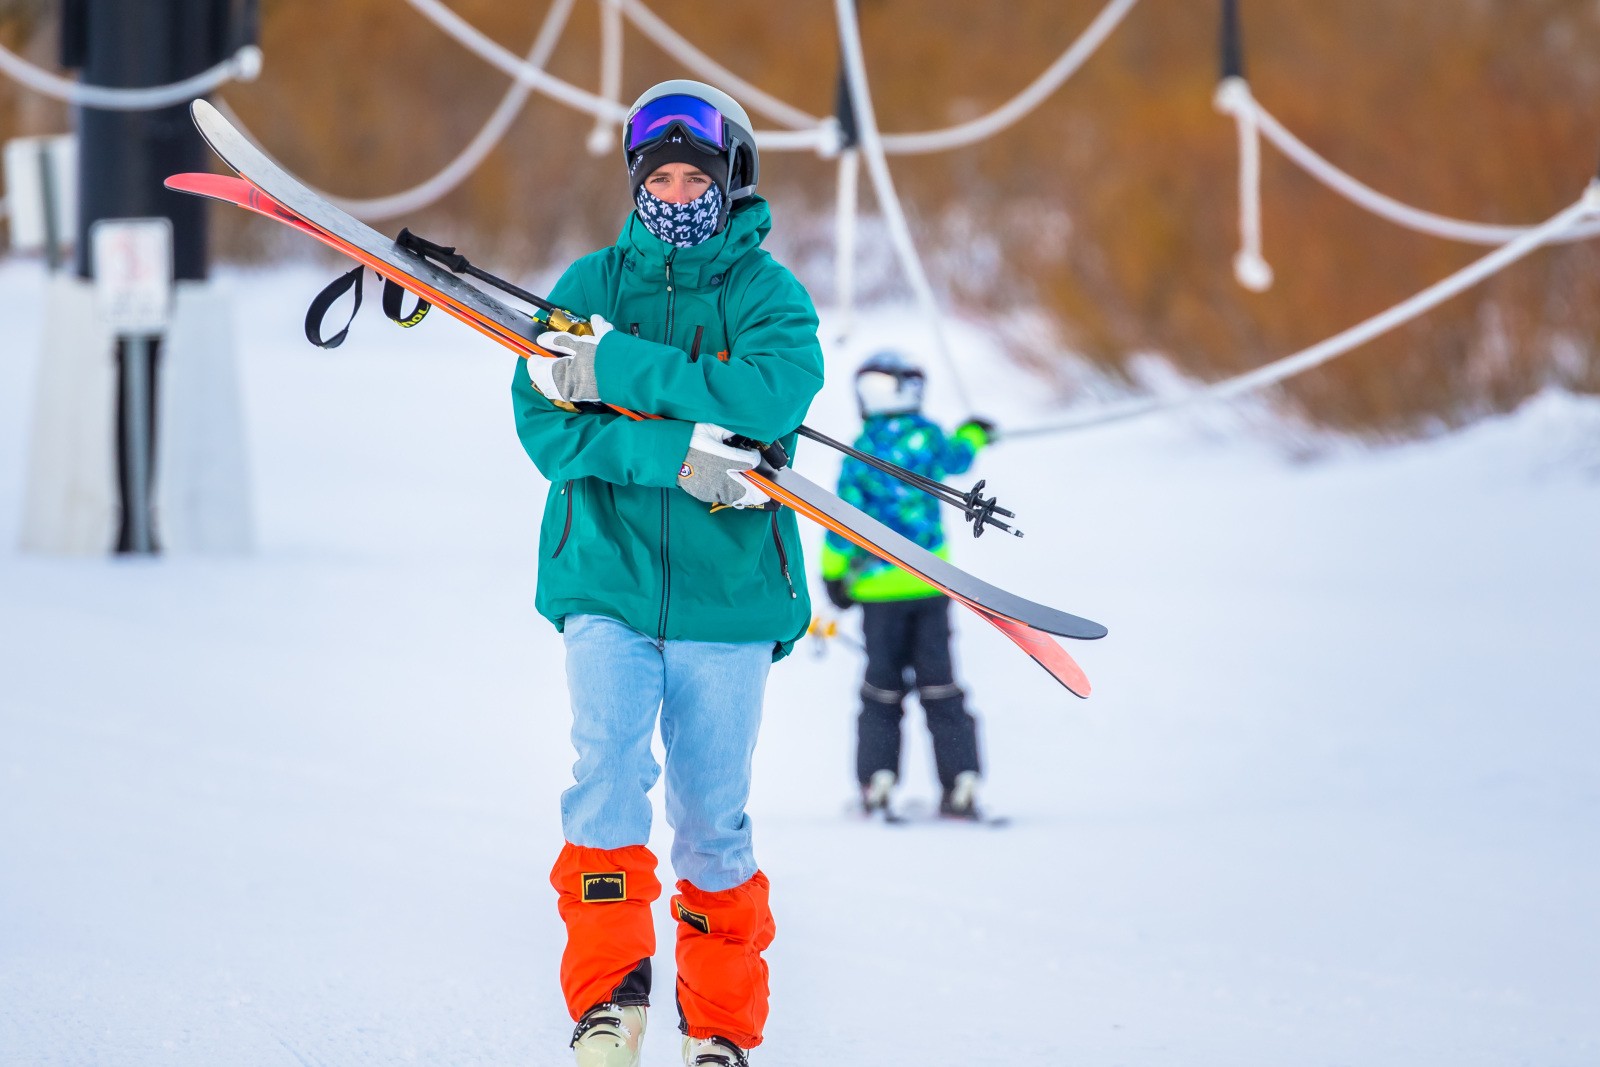 How To Carry Your Skis: A Visual Guide